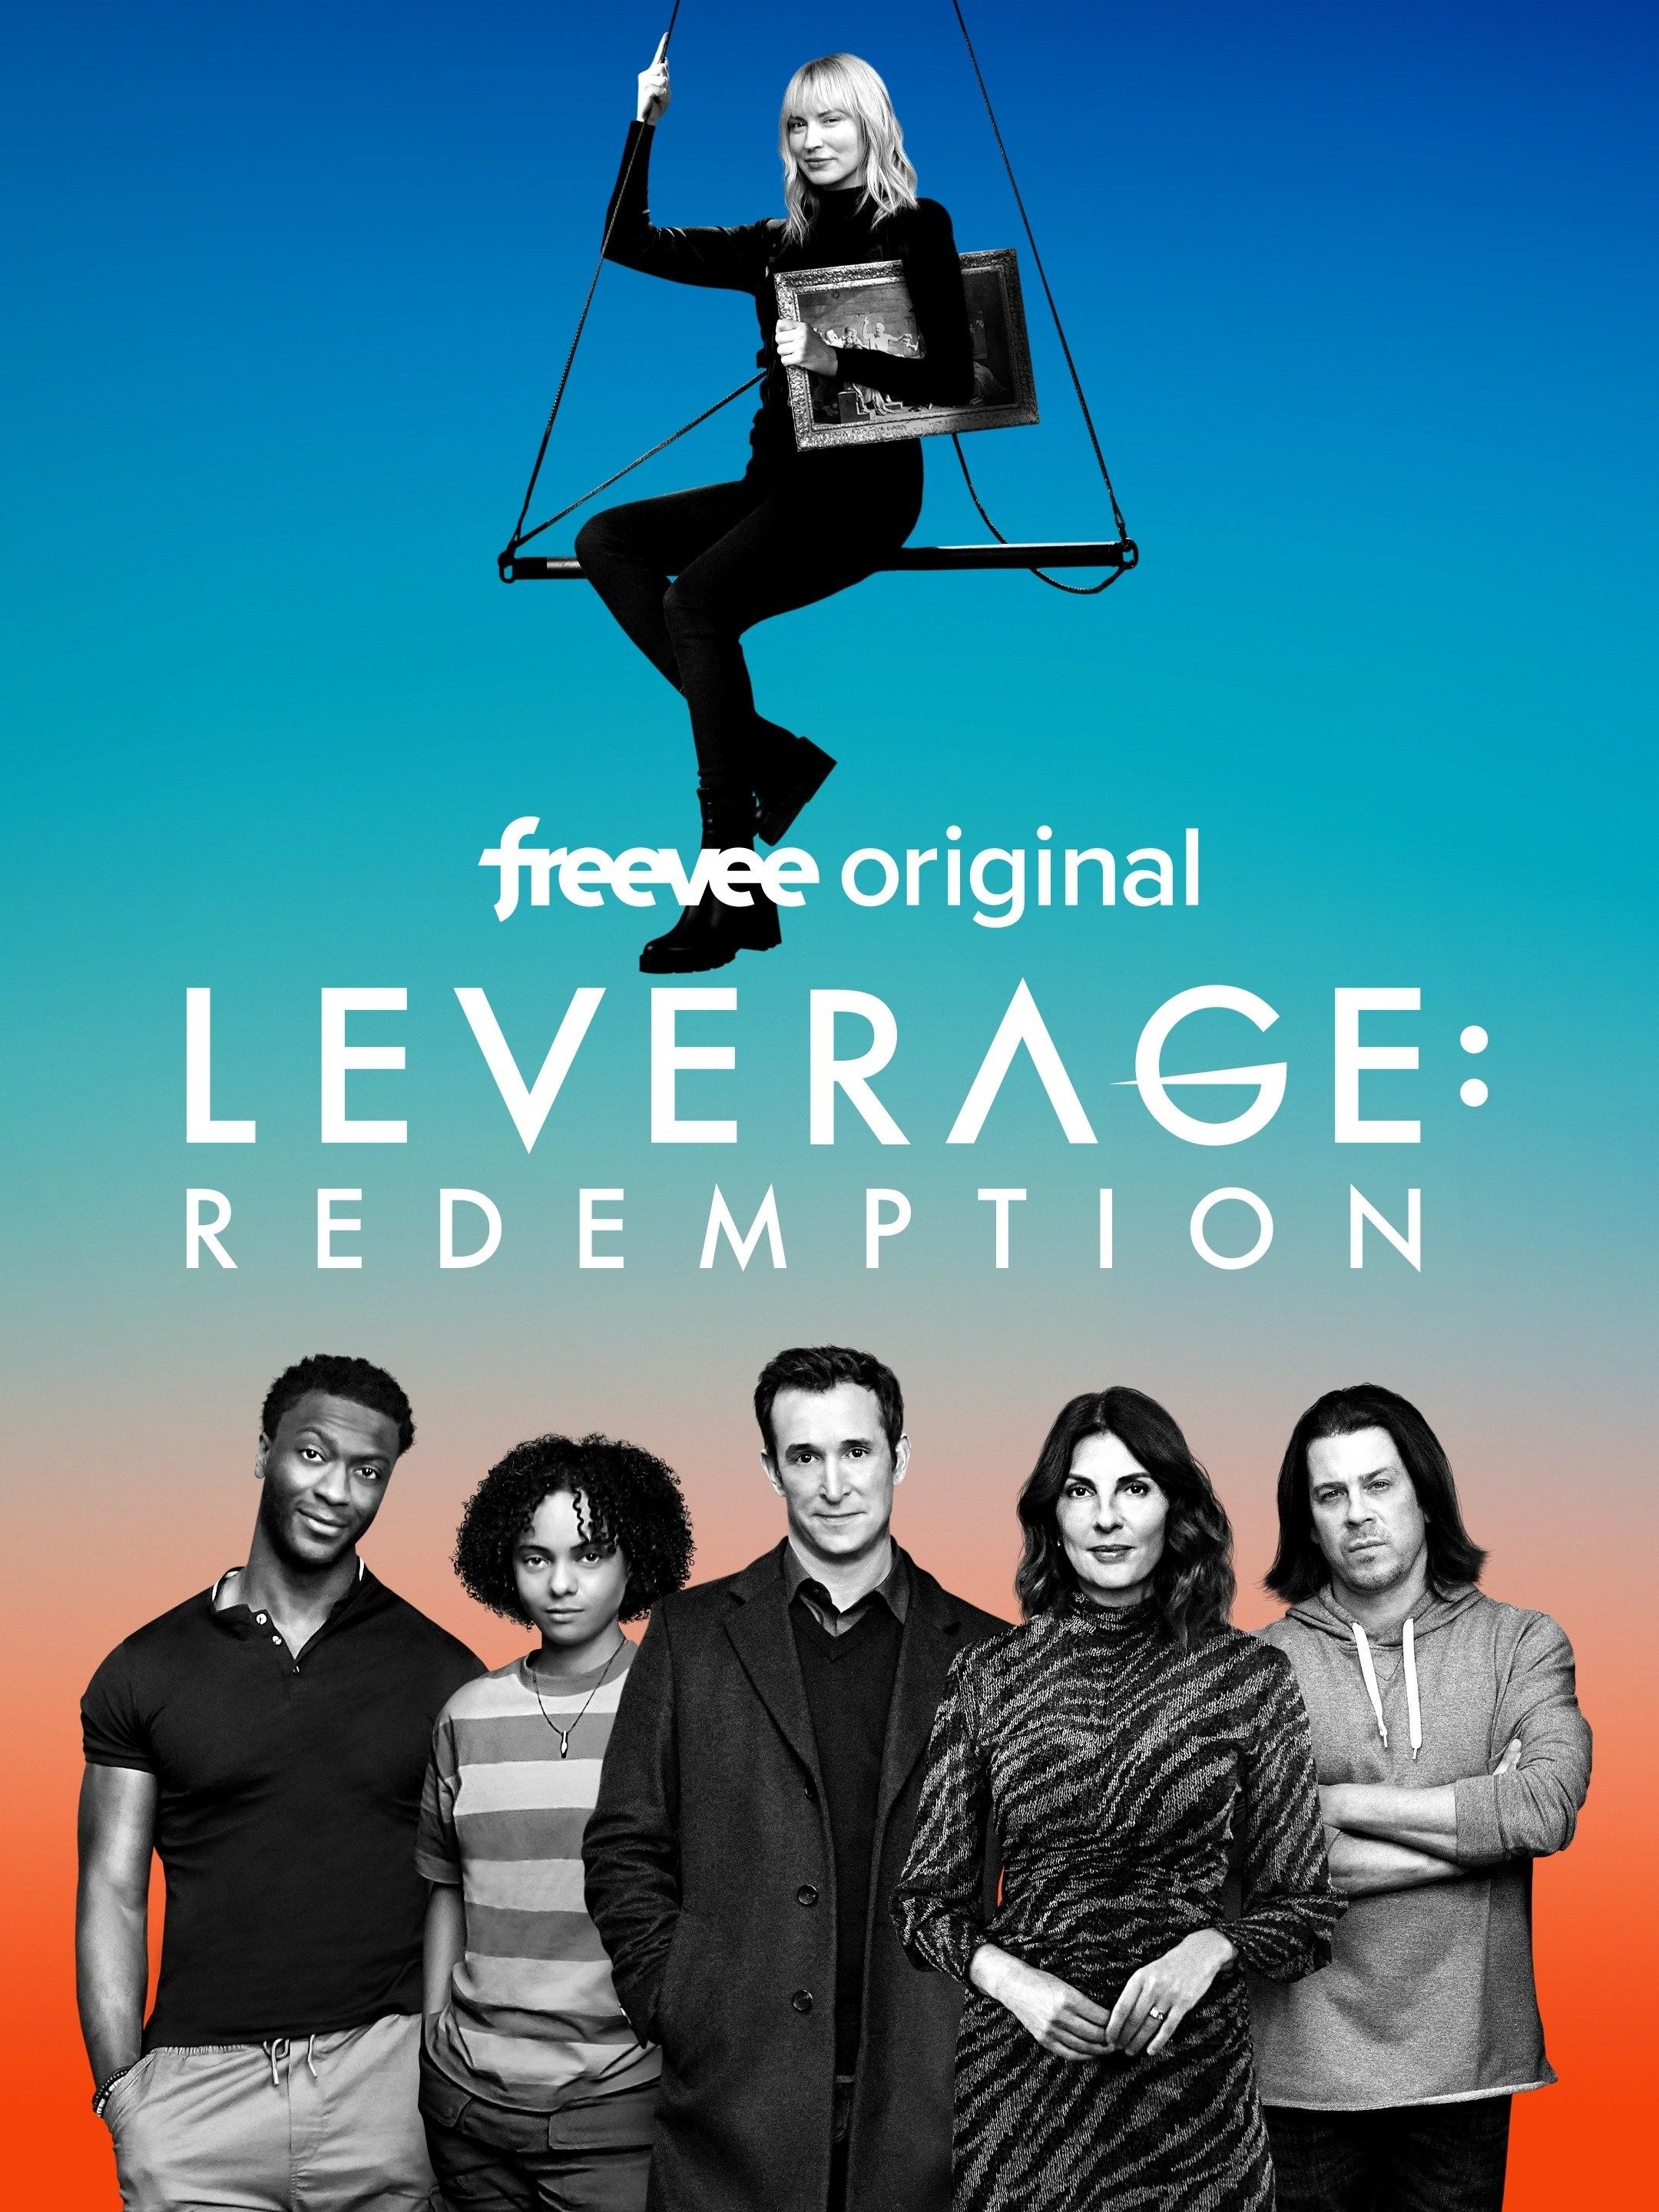 A poster for Leverage Redemption featuring the cast in black and white over an orange and blue background.